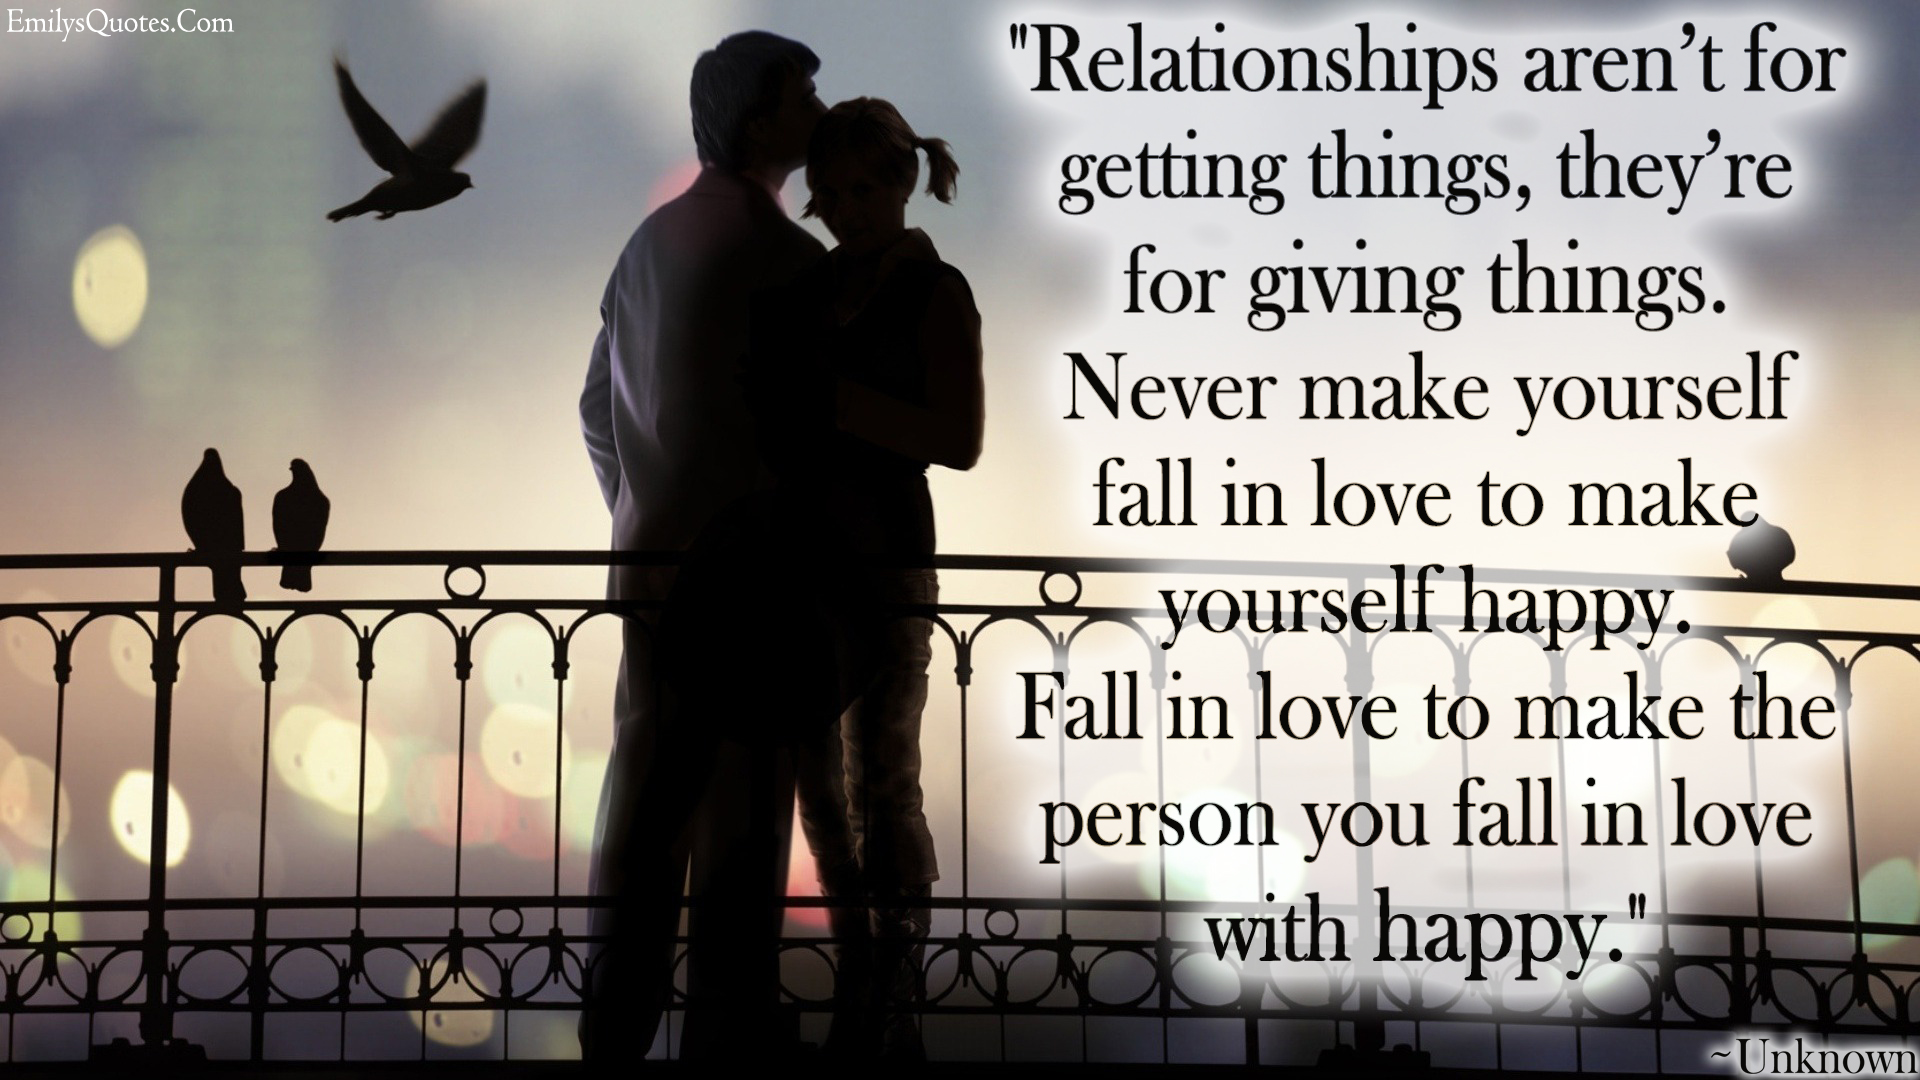 Relationships aren’t for getting things, they’re for giving things. Never make yourself fall in love to make yourself happy. Fall in love to make the person you fall in love with happy